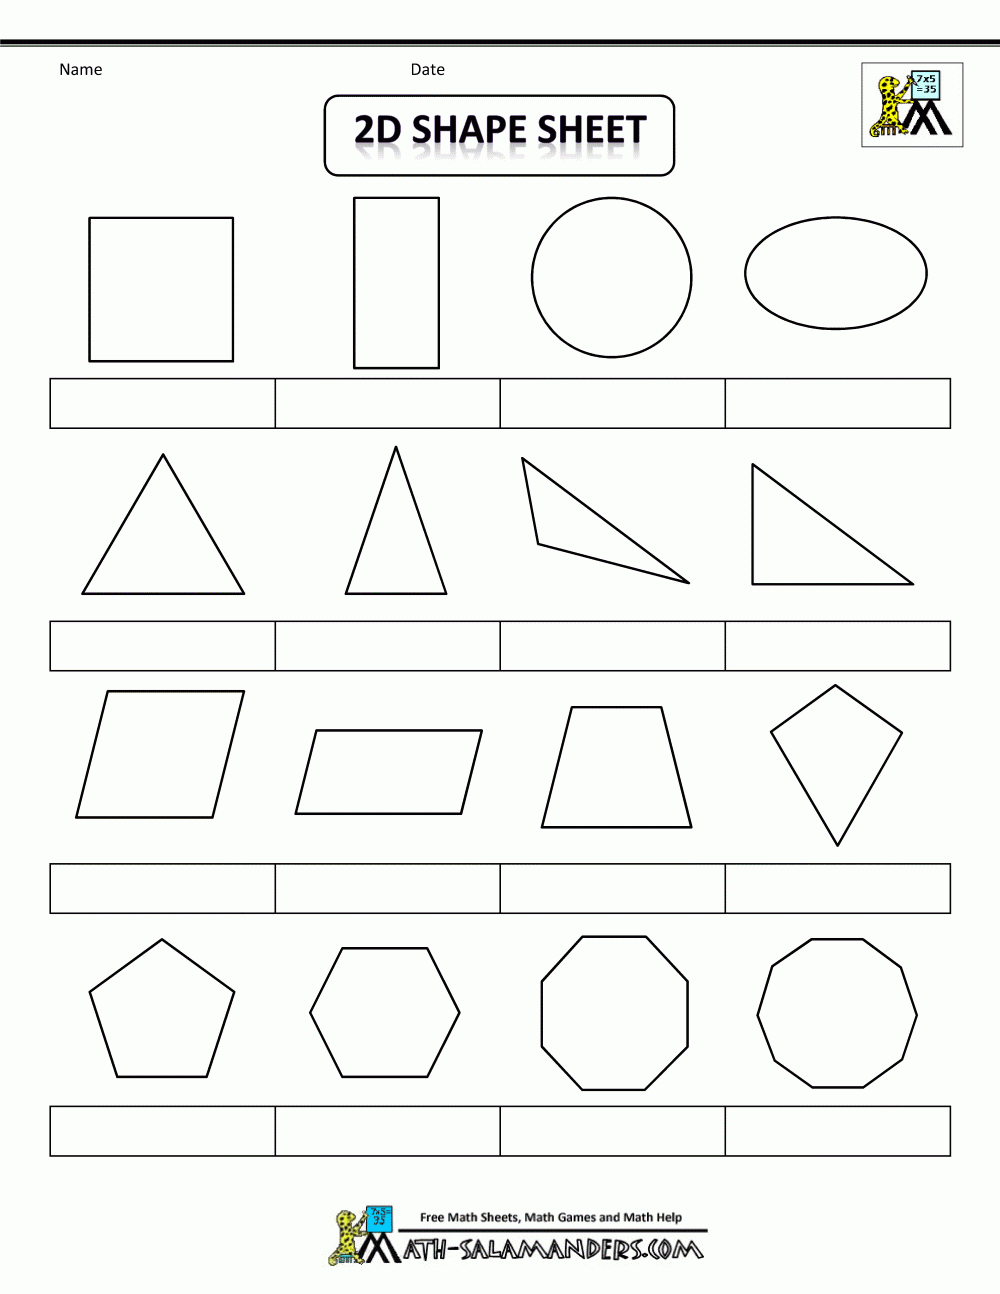 Printable Shapes 2D And 3D - Large Printable Shapes Free